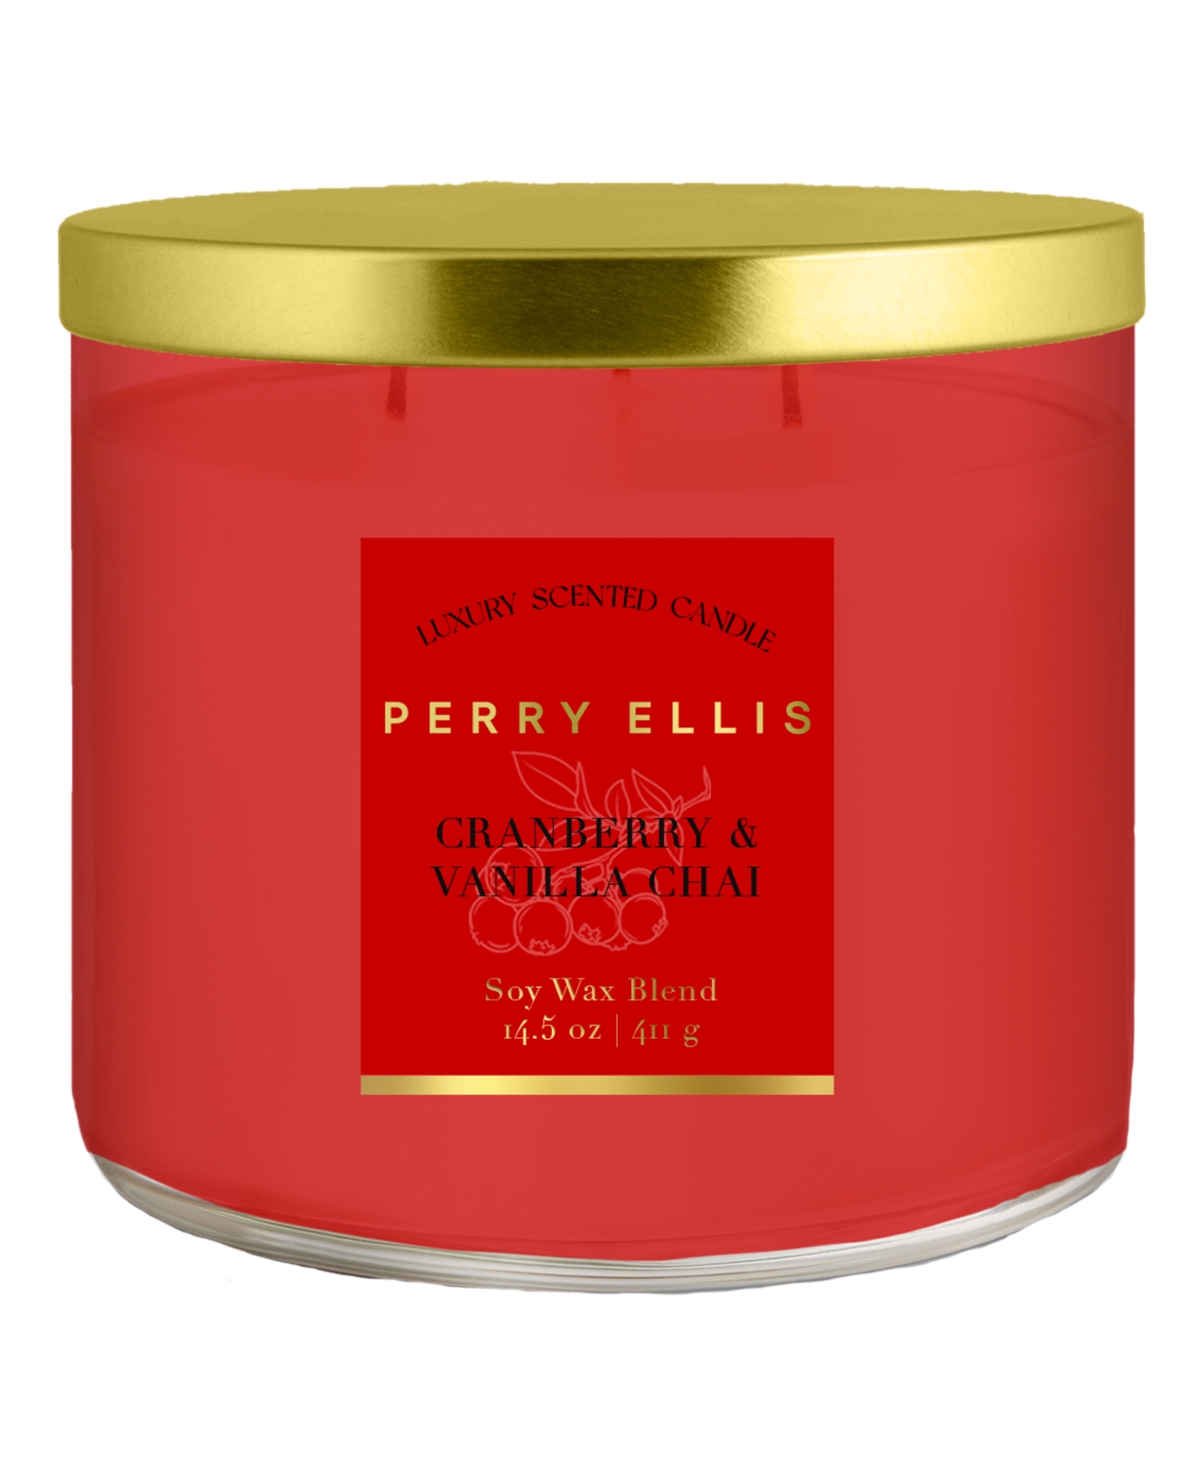 Cranberry and Vanilla Chai Candle, 14.5 oz